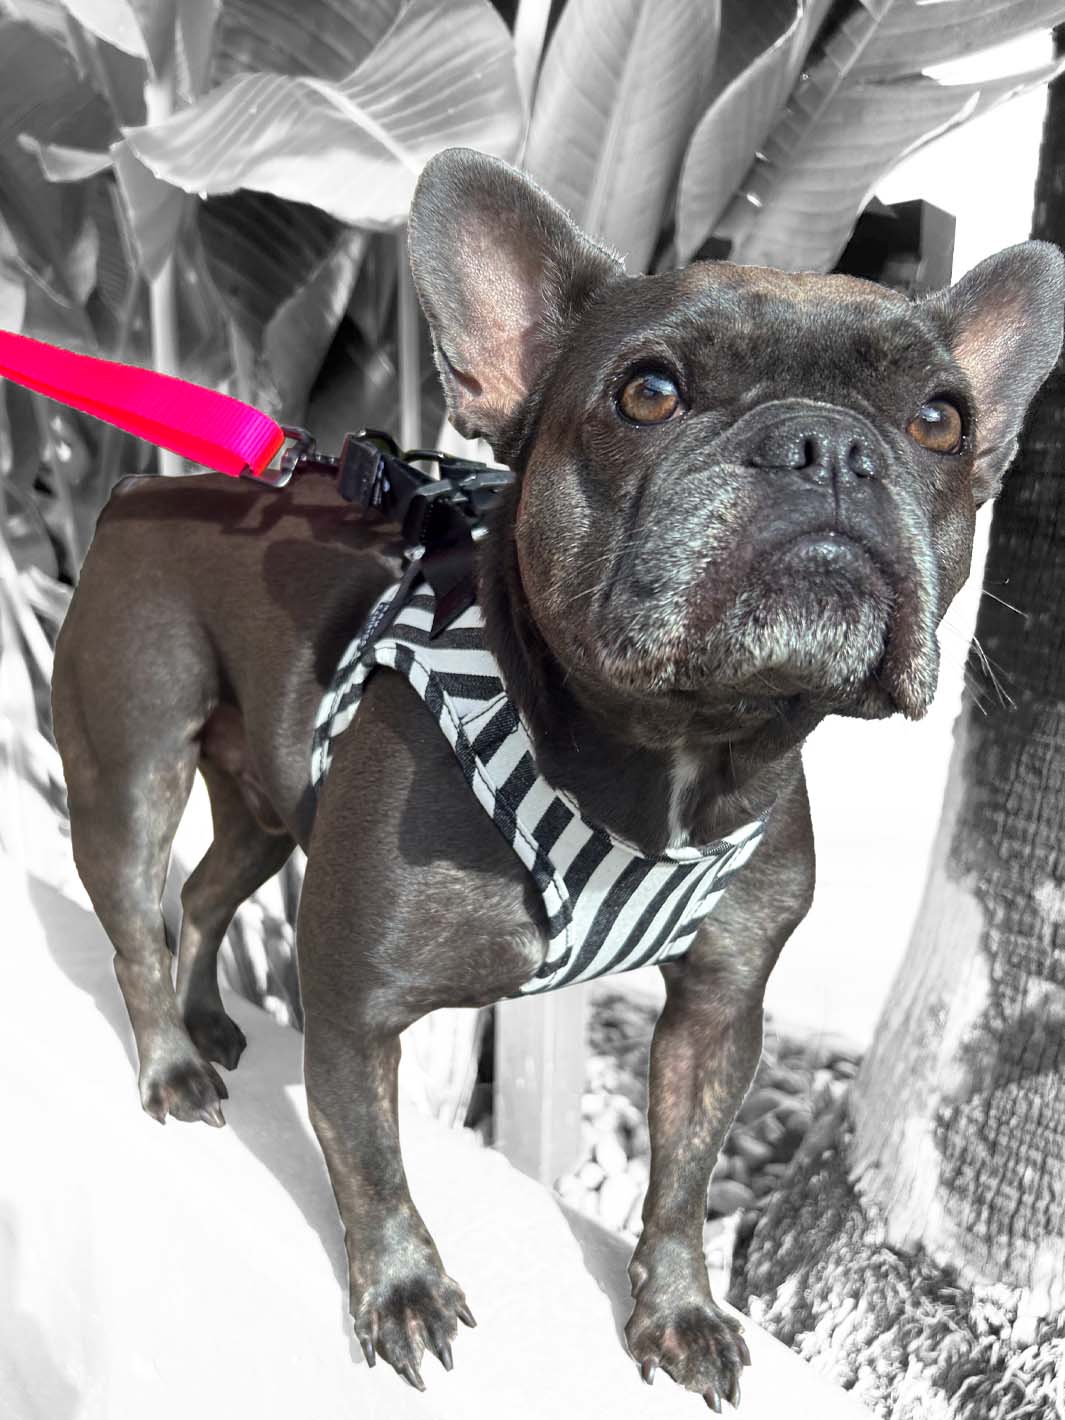 The cutest french bulldog in the world wearing limited edition striped denim vest harness by MAGNUS Canis.